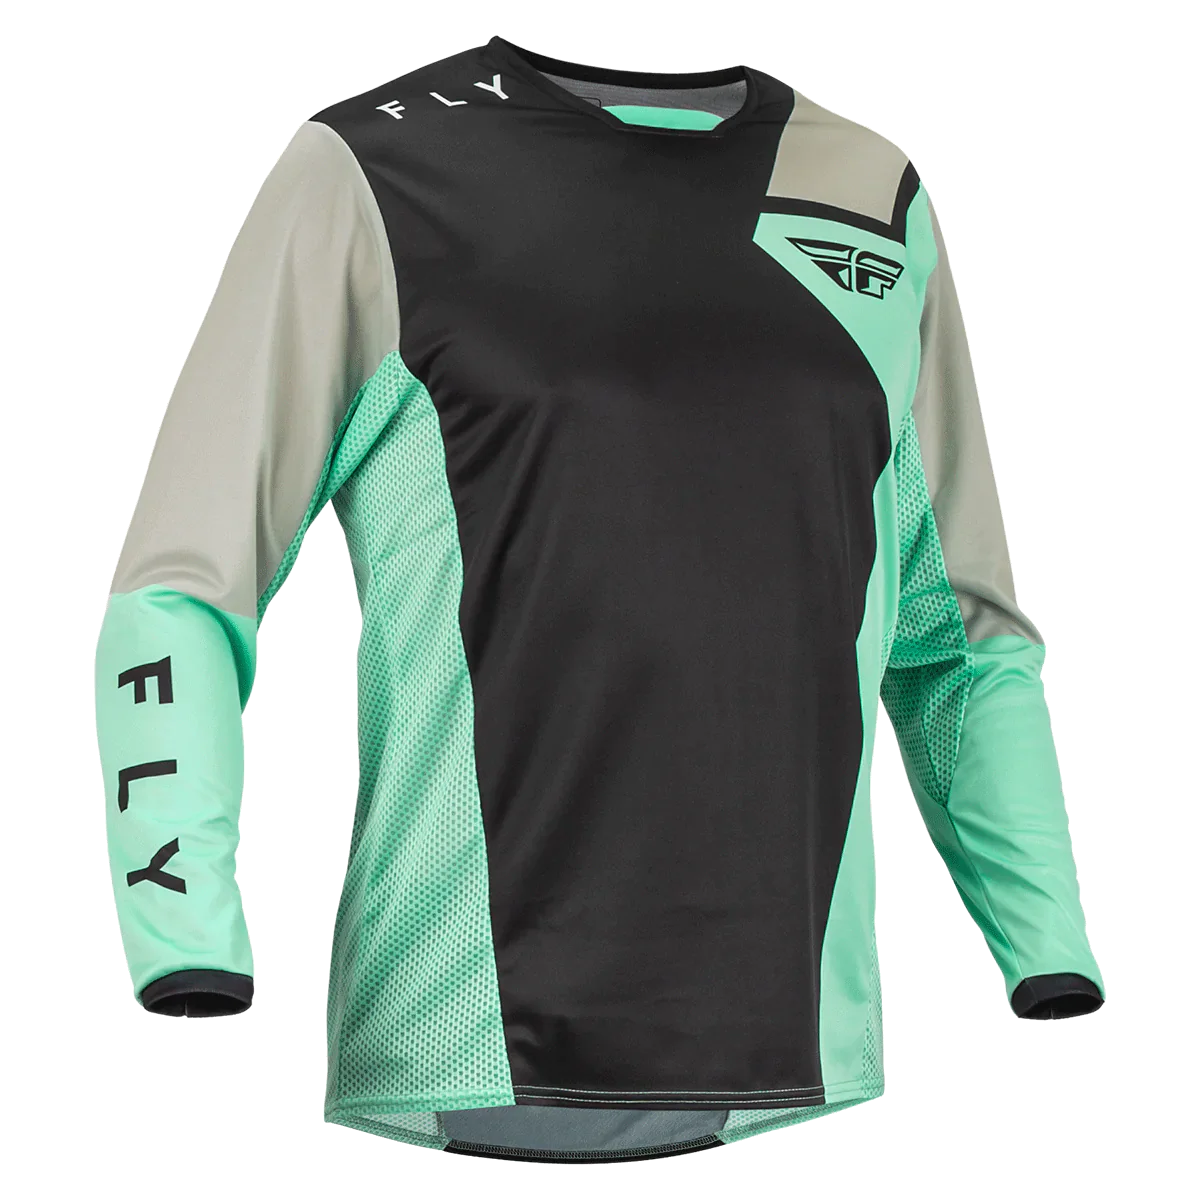 FLY Racing Men's Kinetic S.E. Jersey - Rave